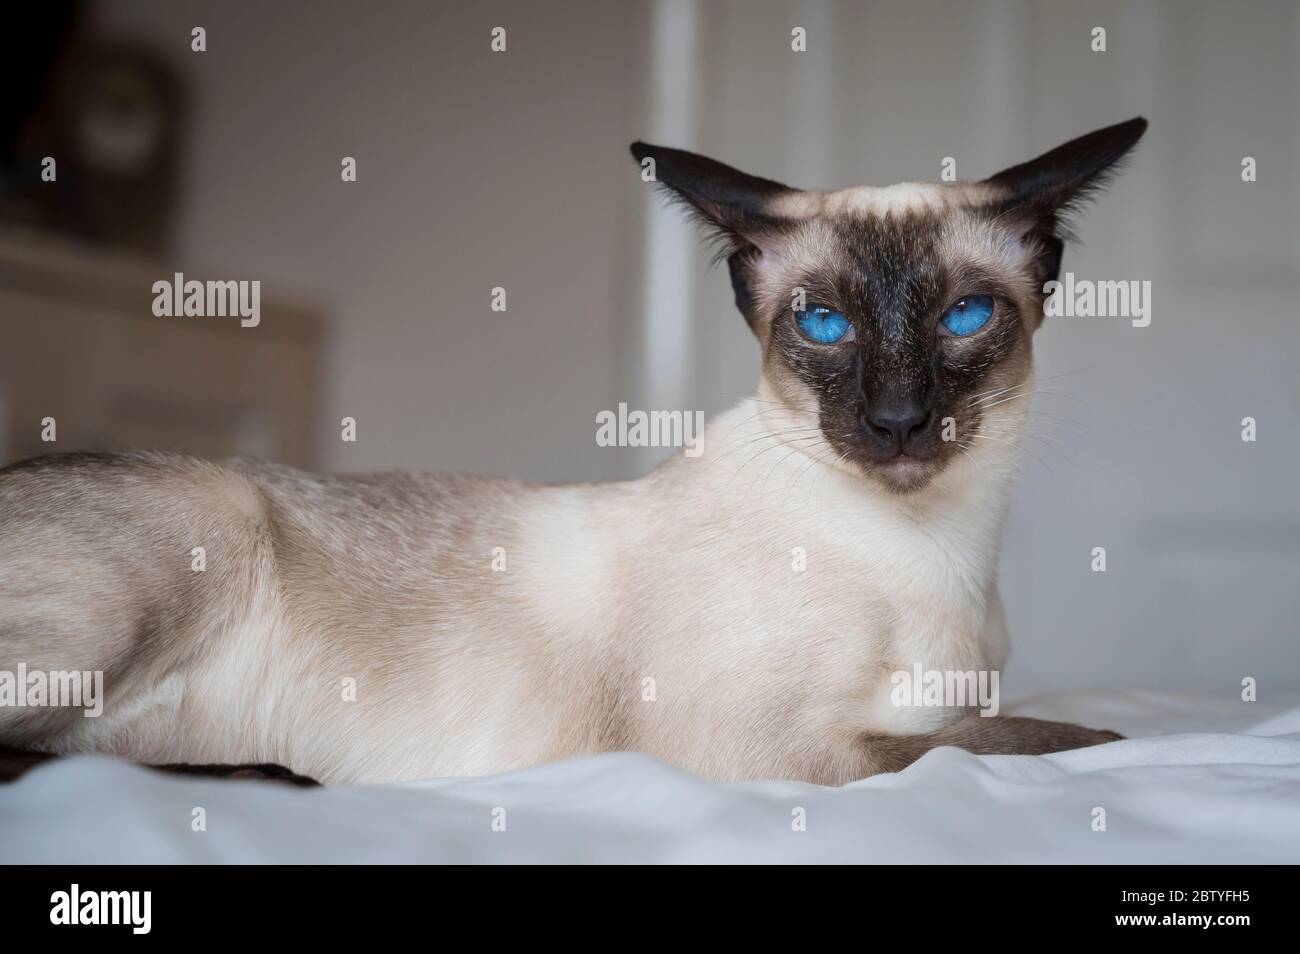 Portrait of a siamese cat with striking blue eyes. Stock Photo